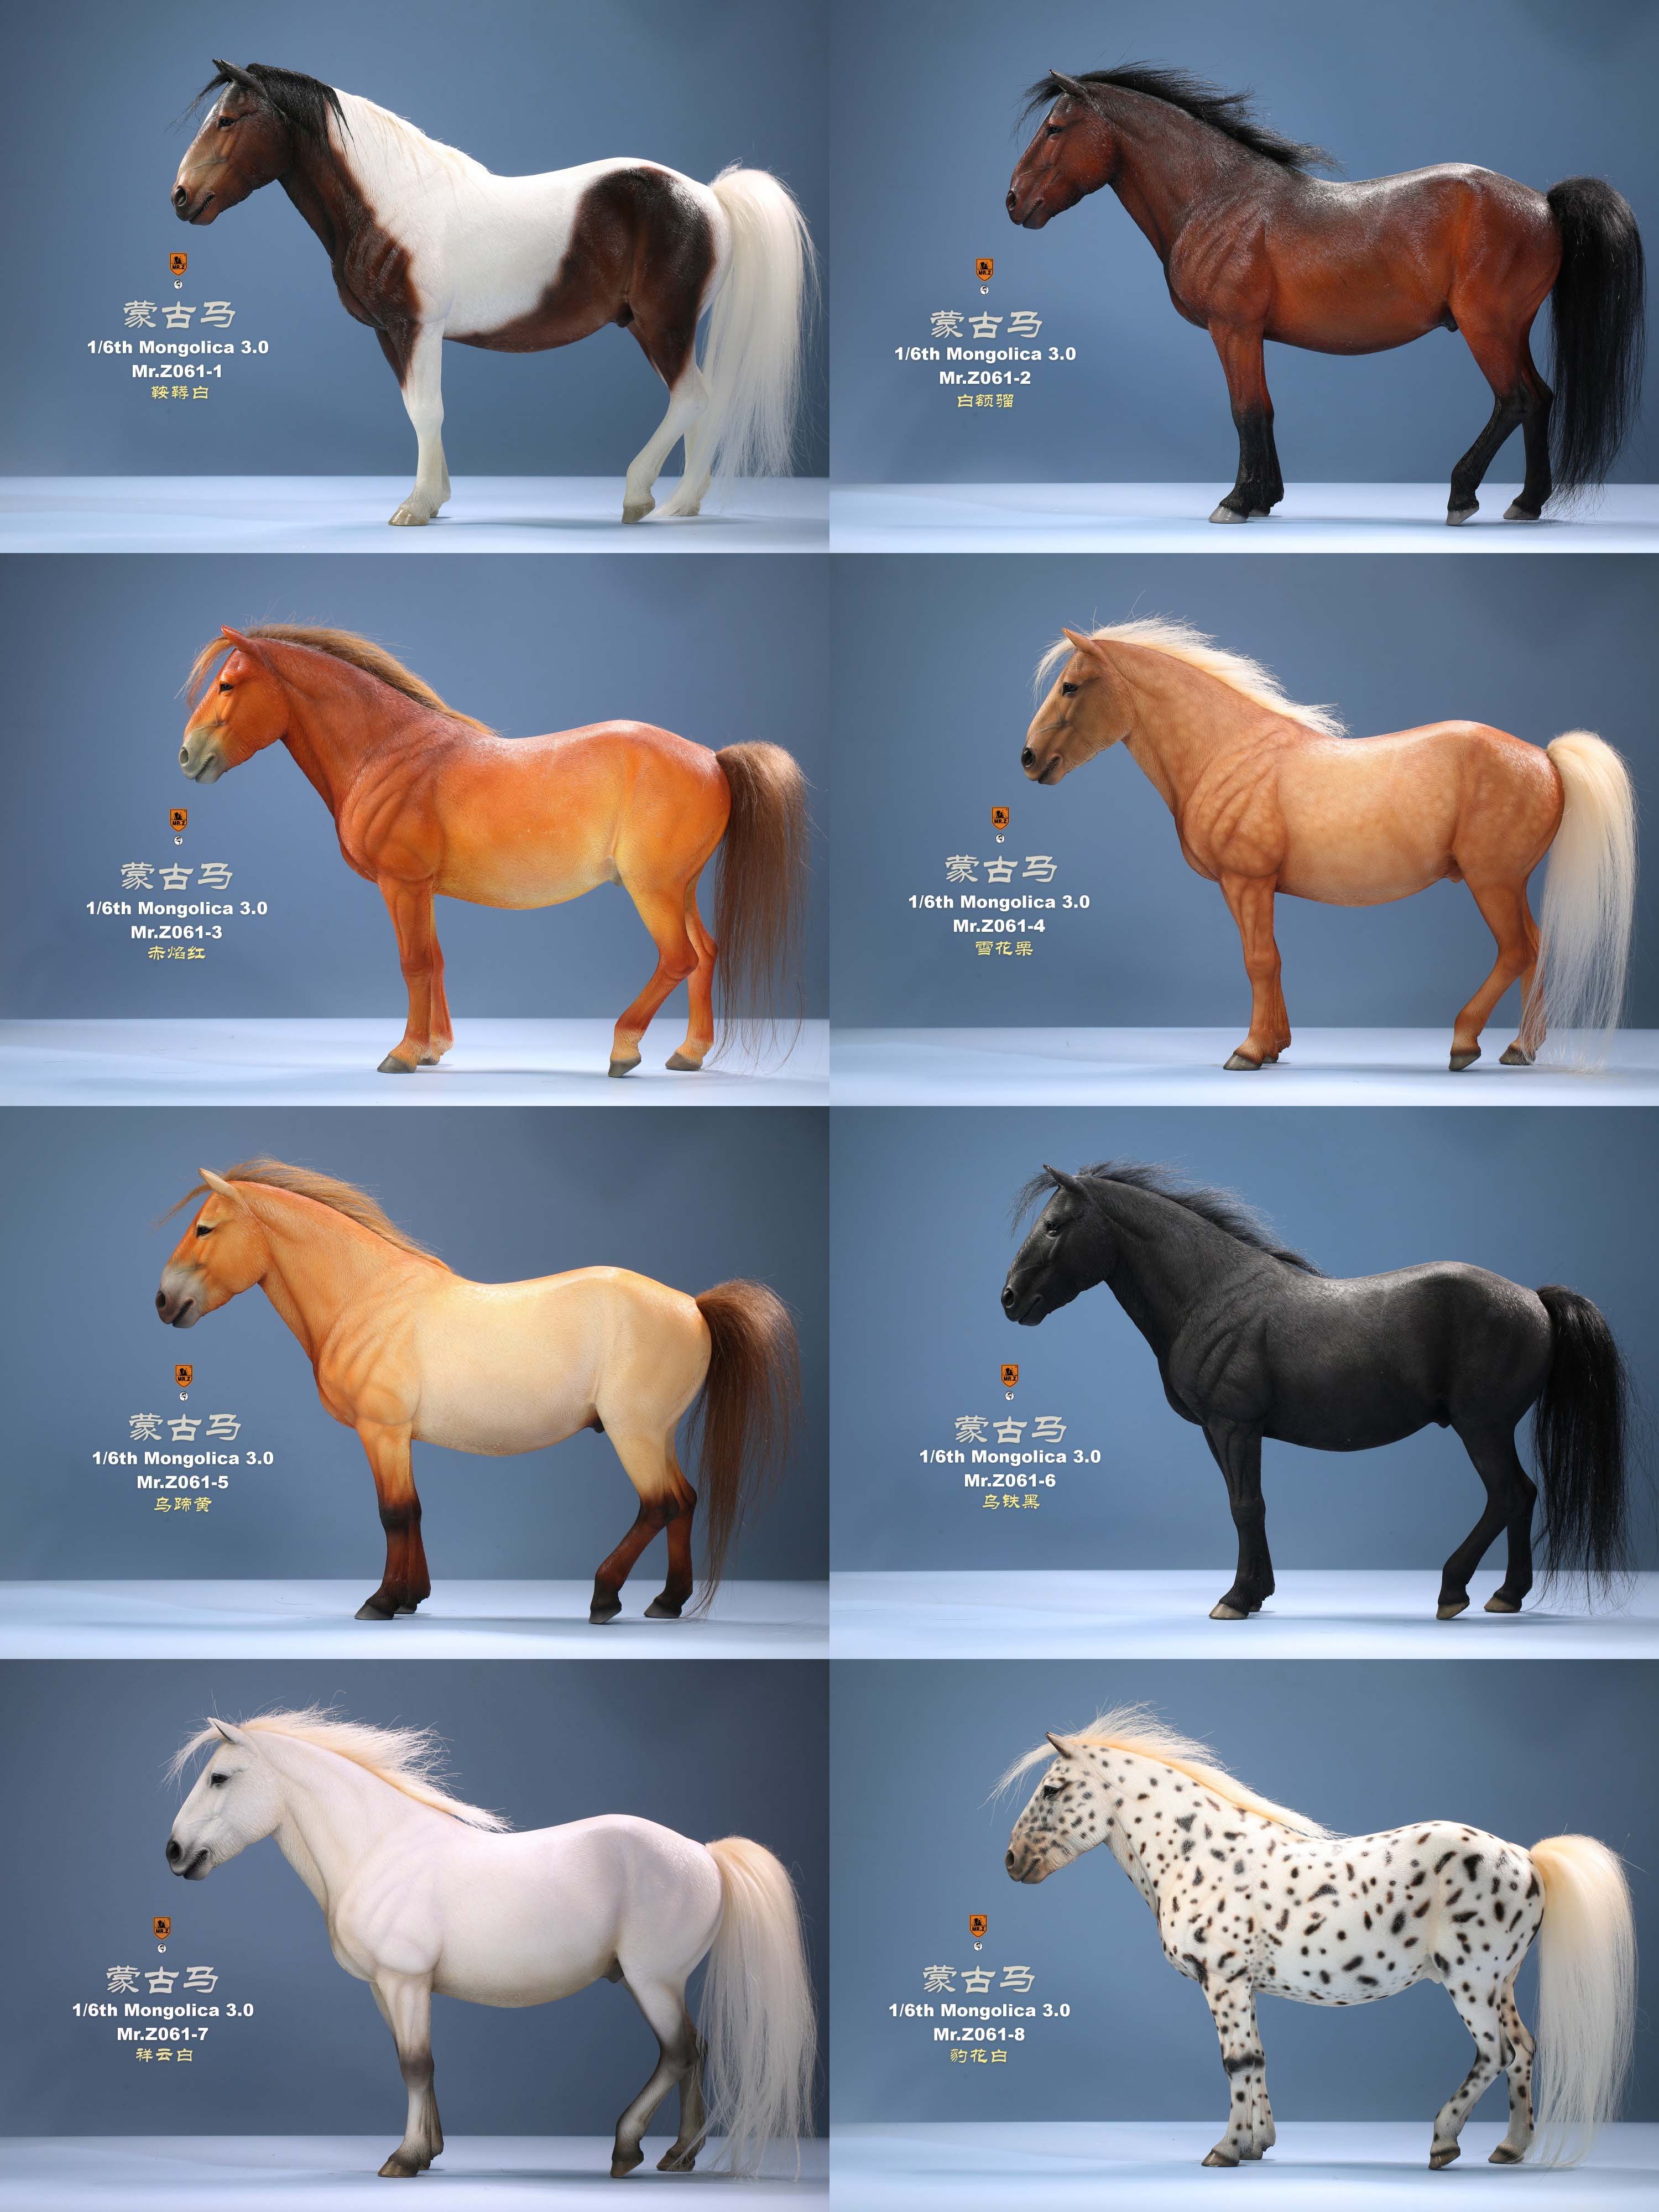 NEW PRODUCT: MR.Z - No. 61 - Mongolian horse set of 8 colors #Z061 & classical harness #DT001-S 01109